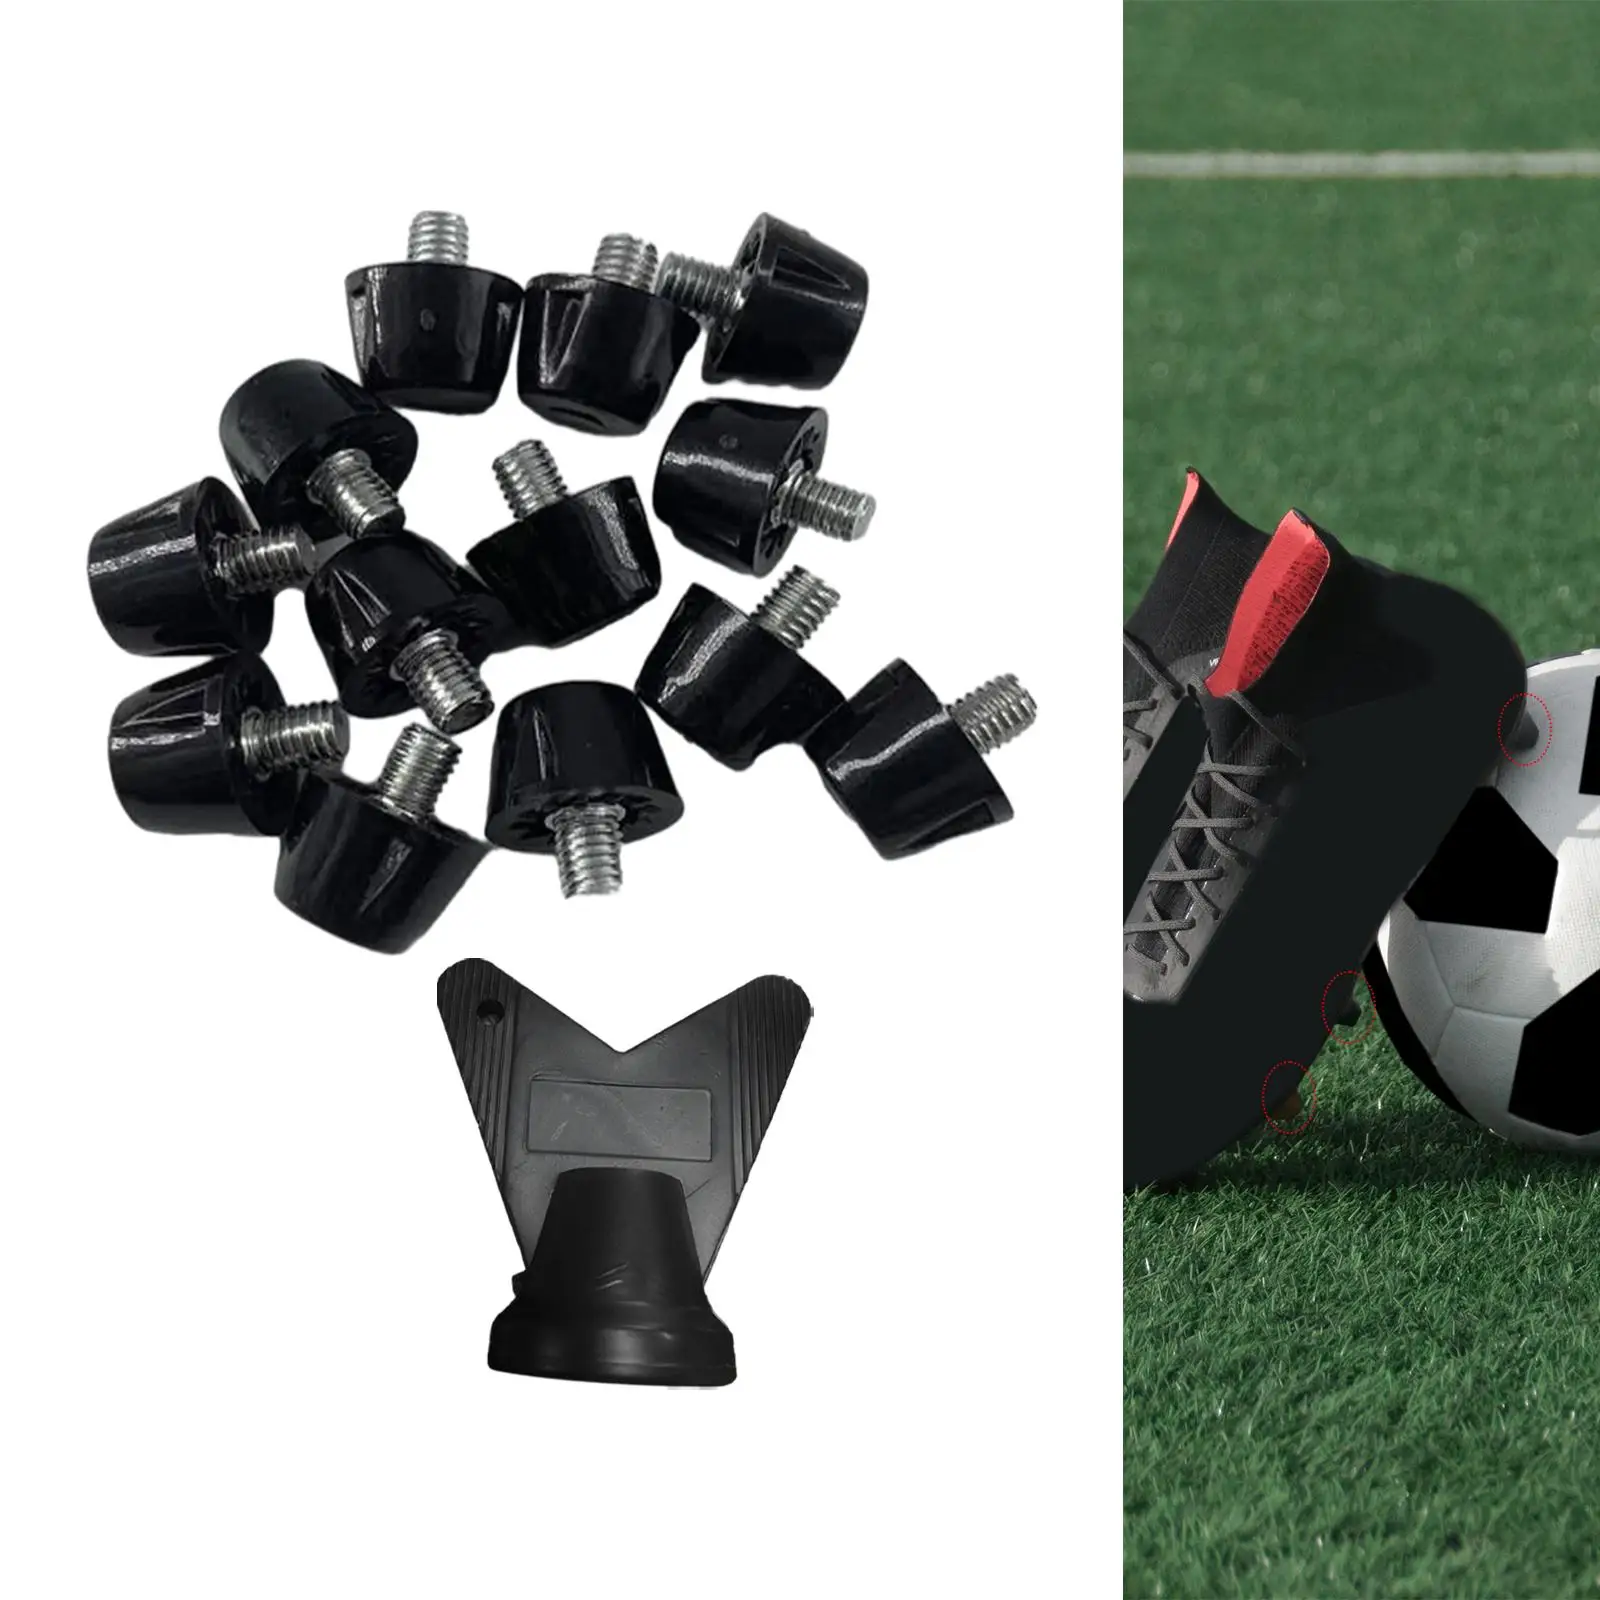 12x Football Boot Spikes Thread Screw 5mm Dia Durable Turf Soccer Boot Cleats Replacement Football Studs Track Shoe Accessories